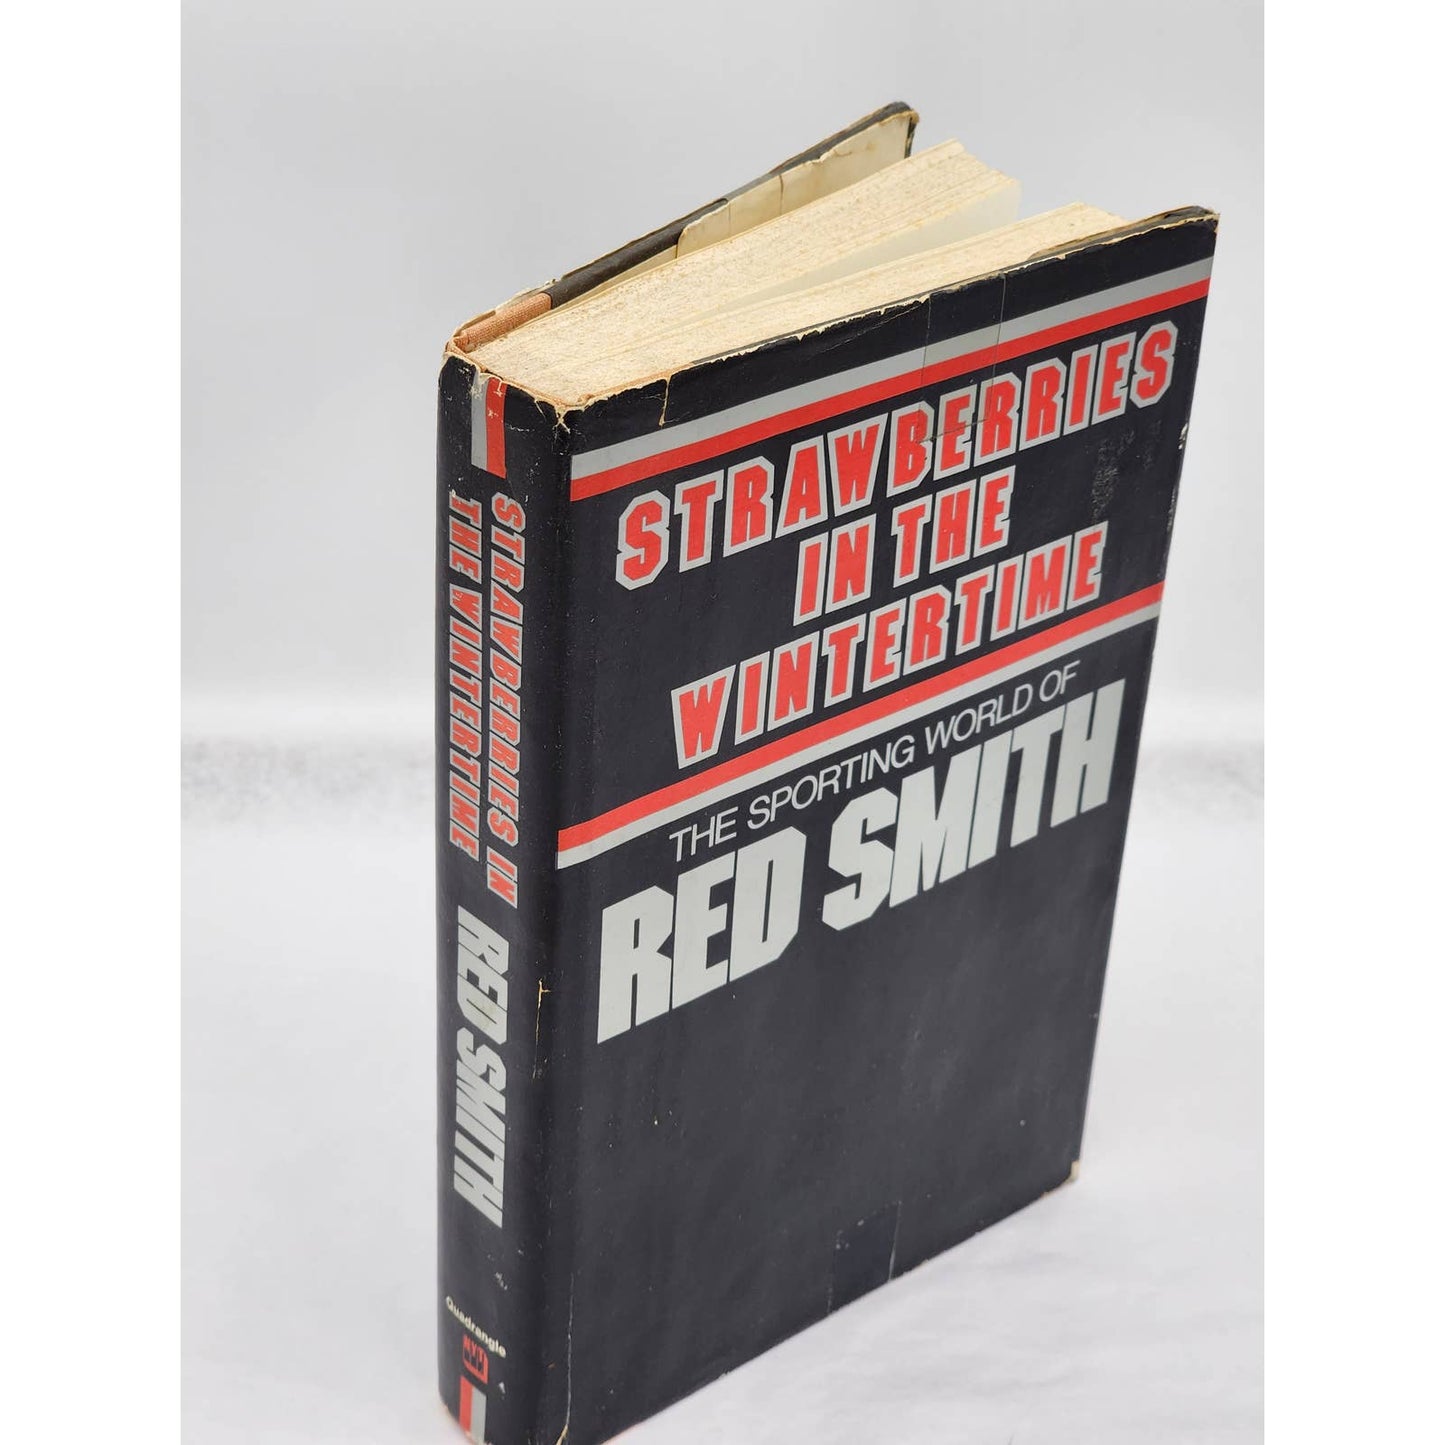 Strawberries In The Wintertime Sporting World Of Red Smith Vintage 1974